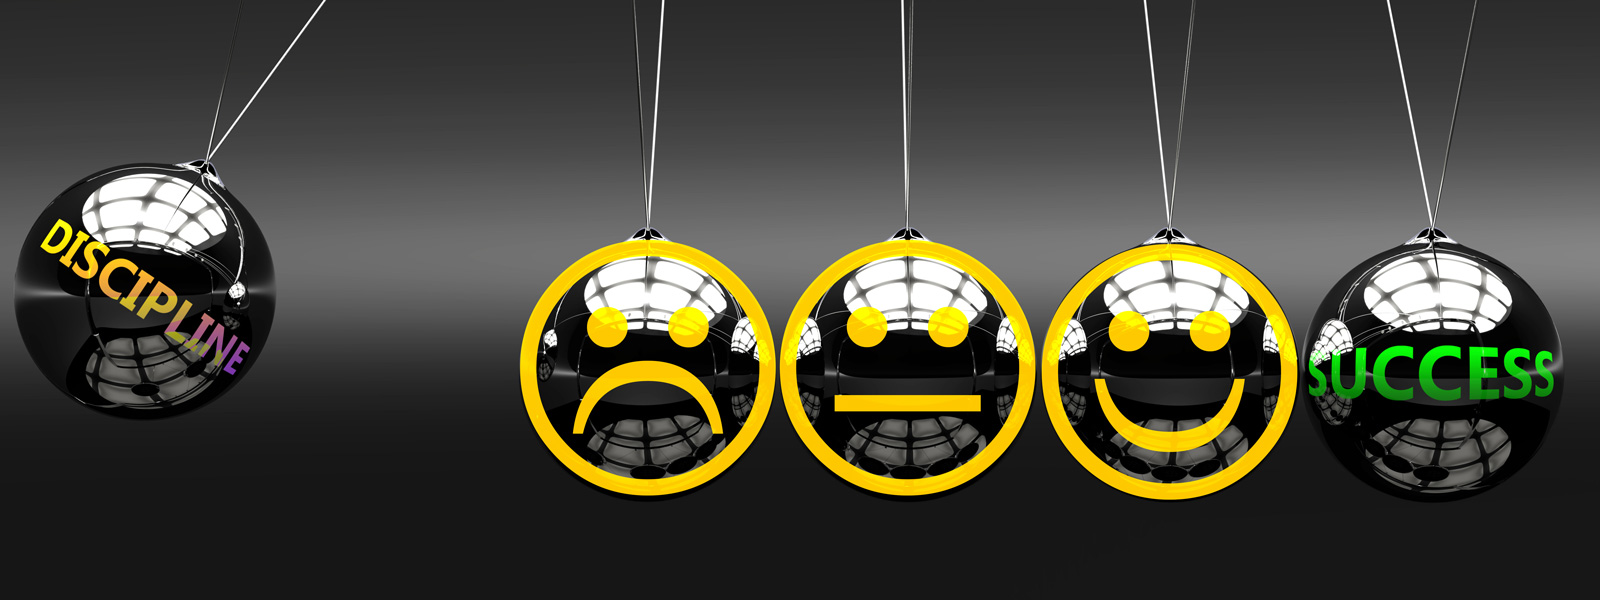 A newtons cradle with progressively happier faces on each ball